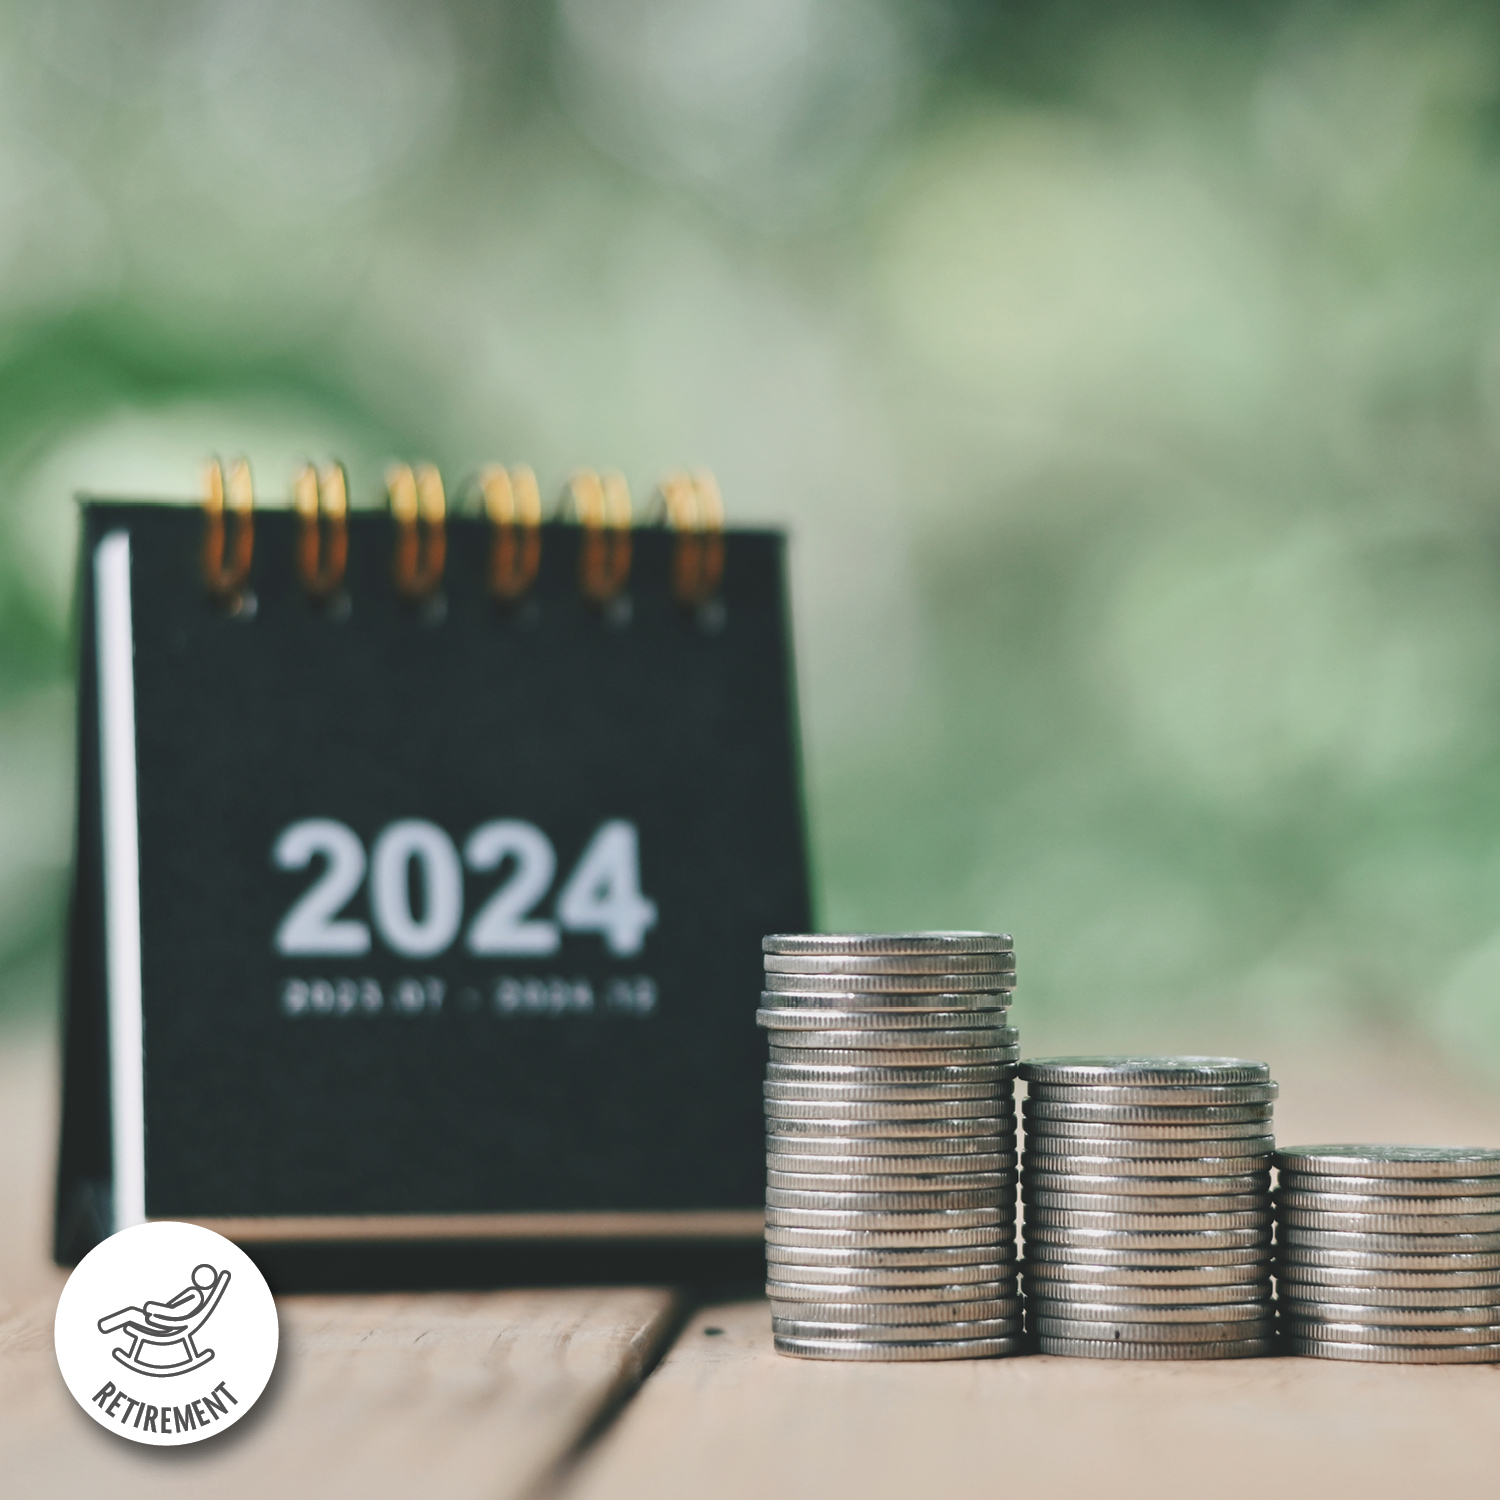 What Changes Are Taking Place for Retirement Plans in 2024?